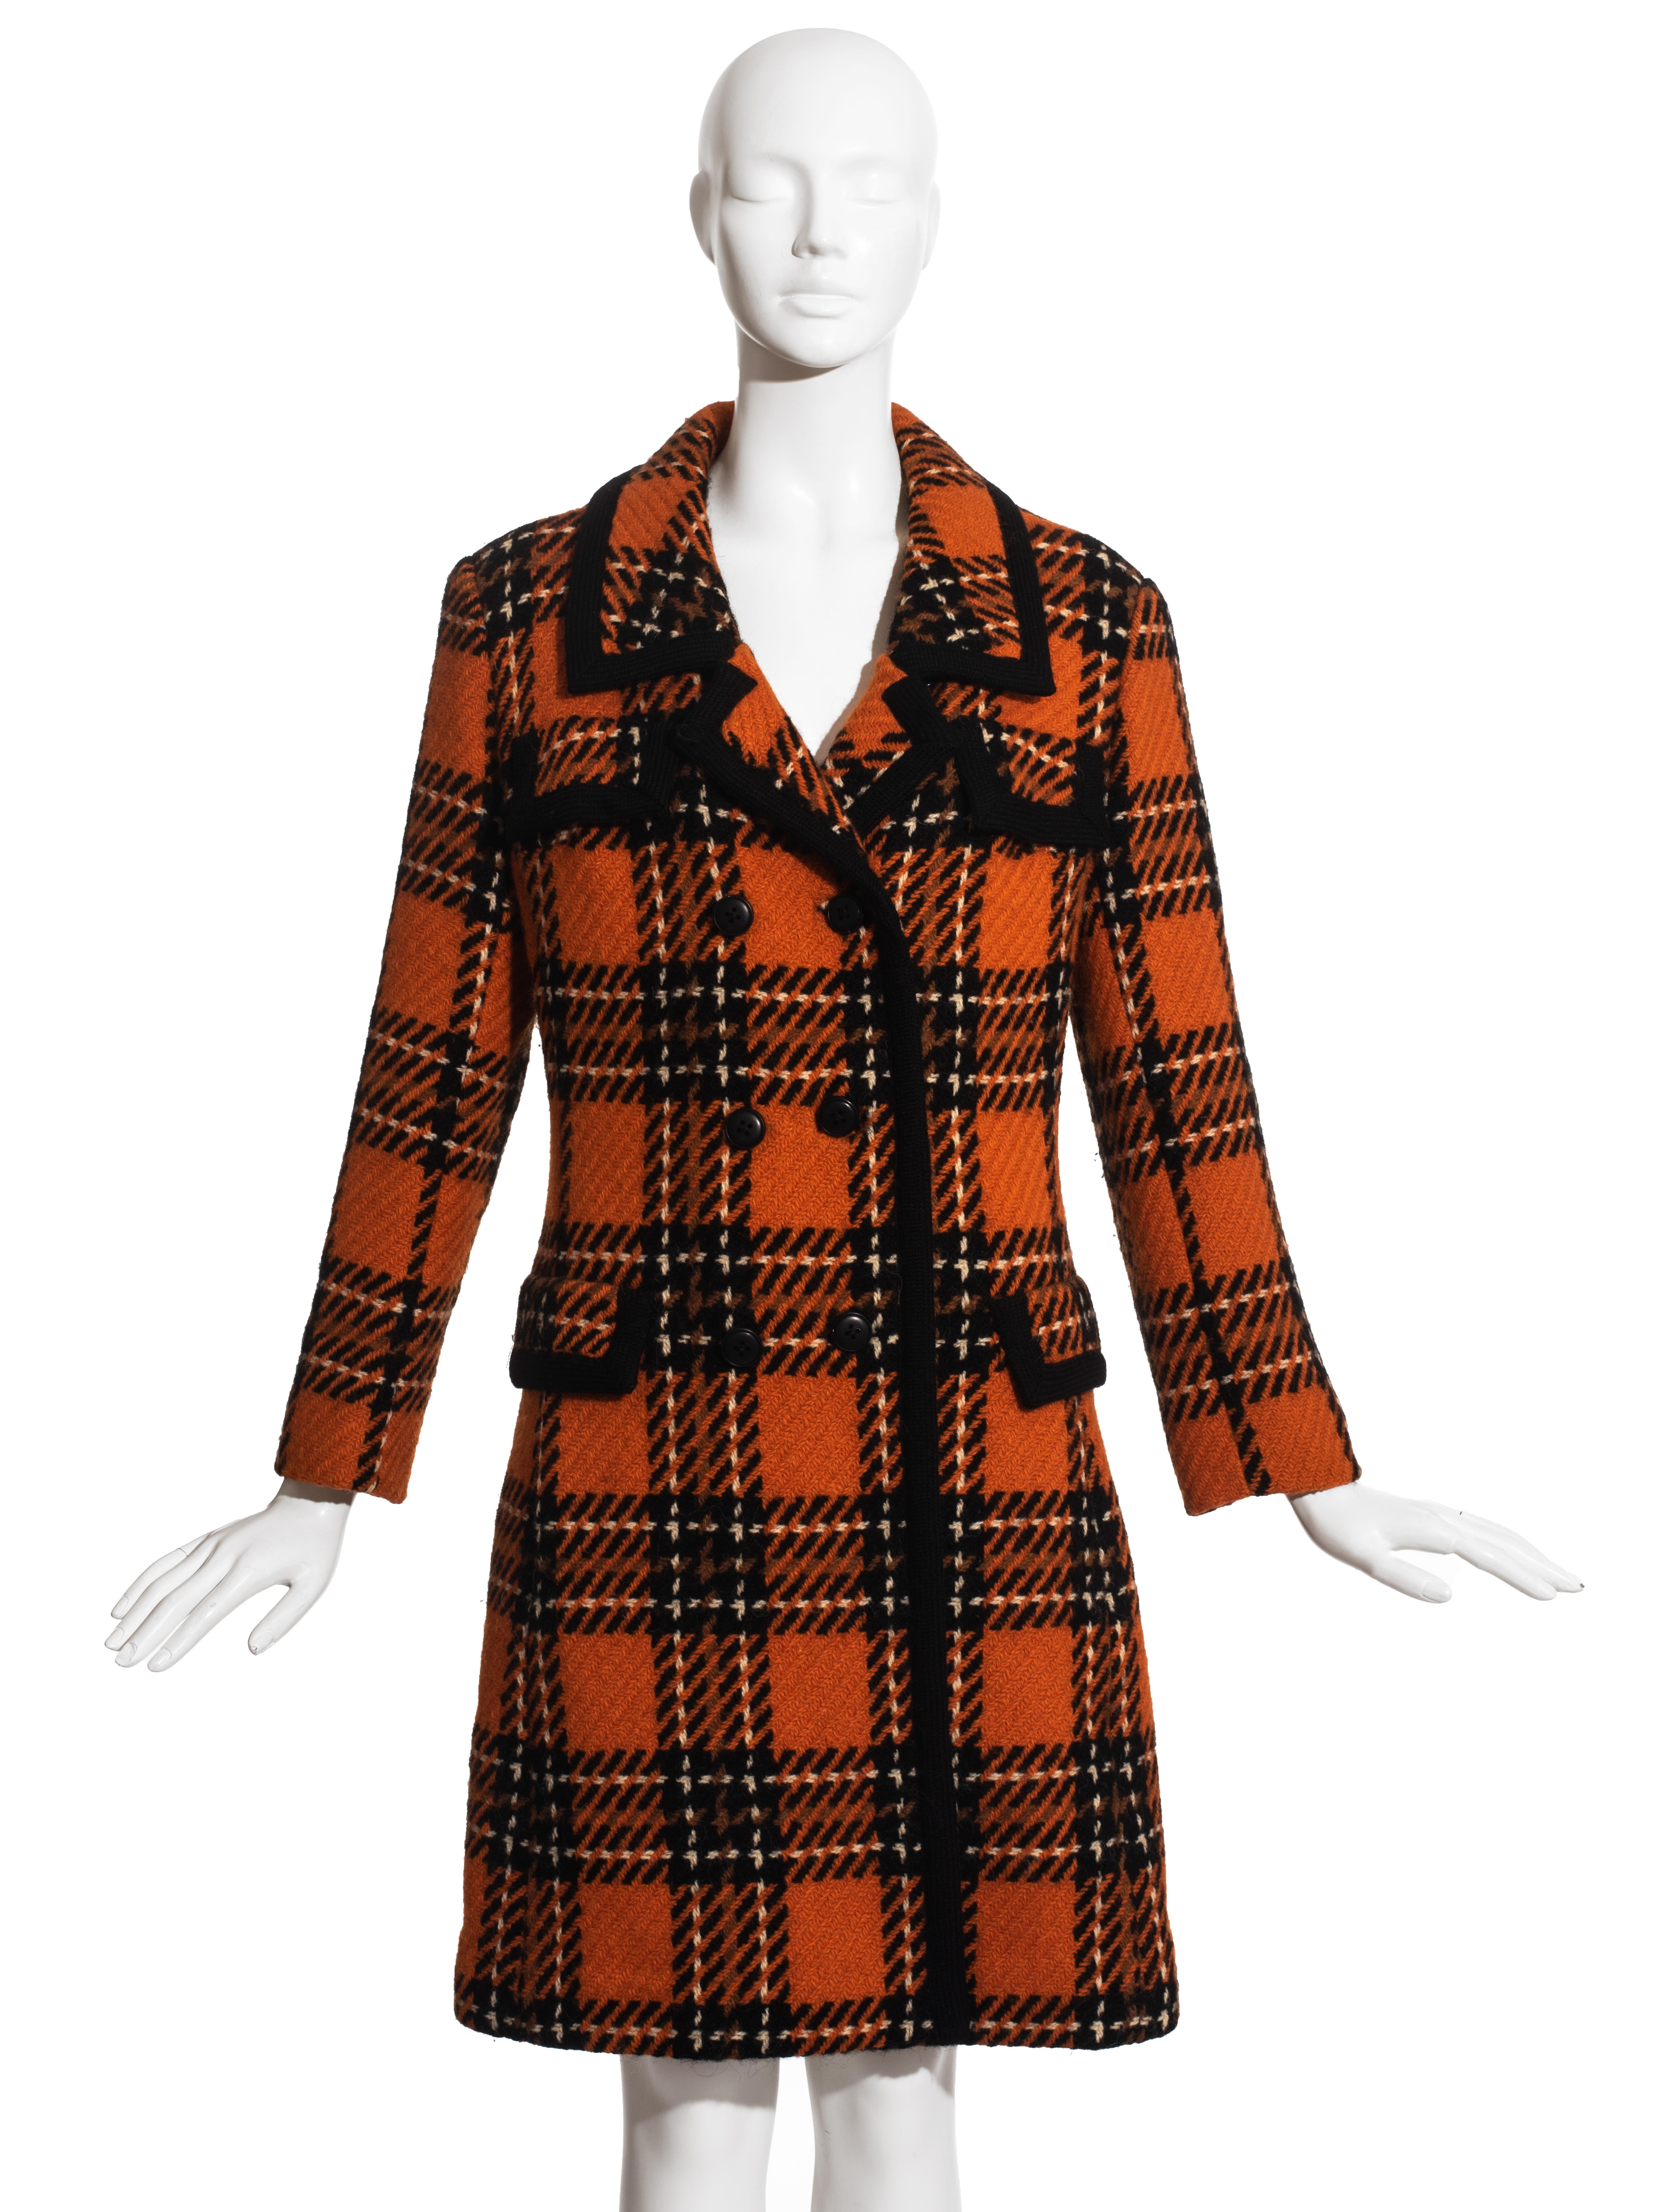 Hardy Amies orange and black wool tweed checked double breasted coat.

c. 1960